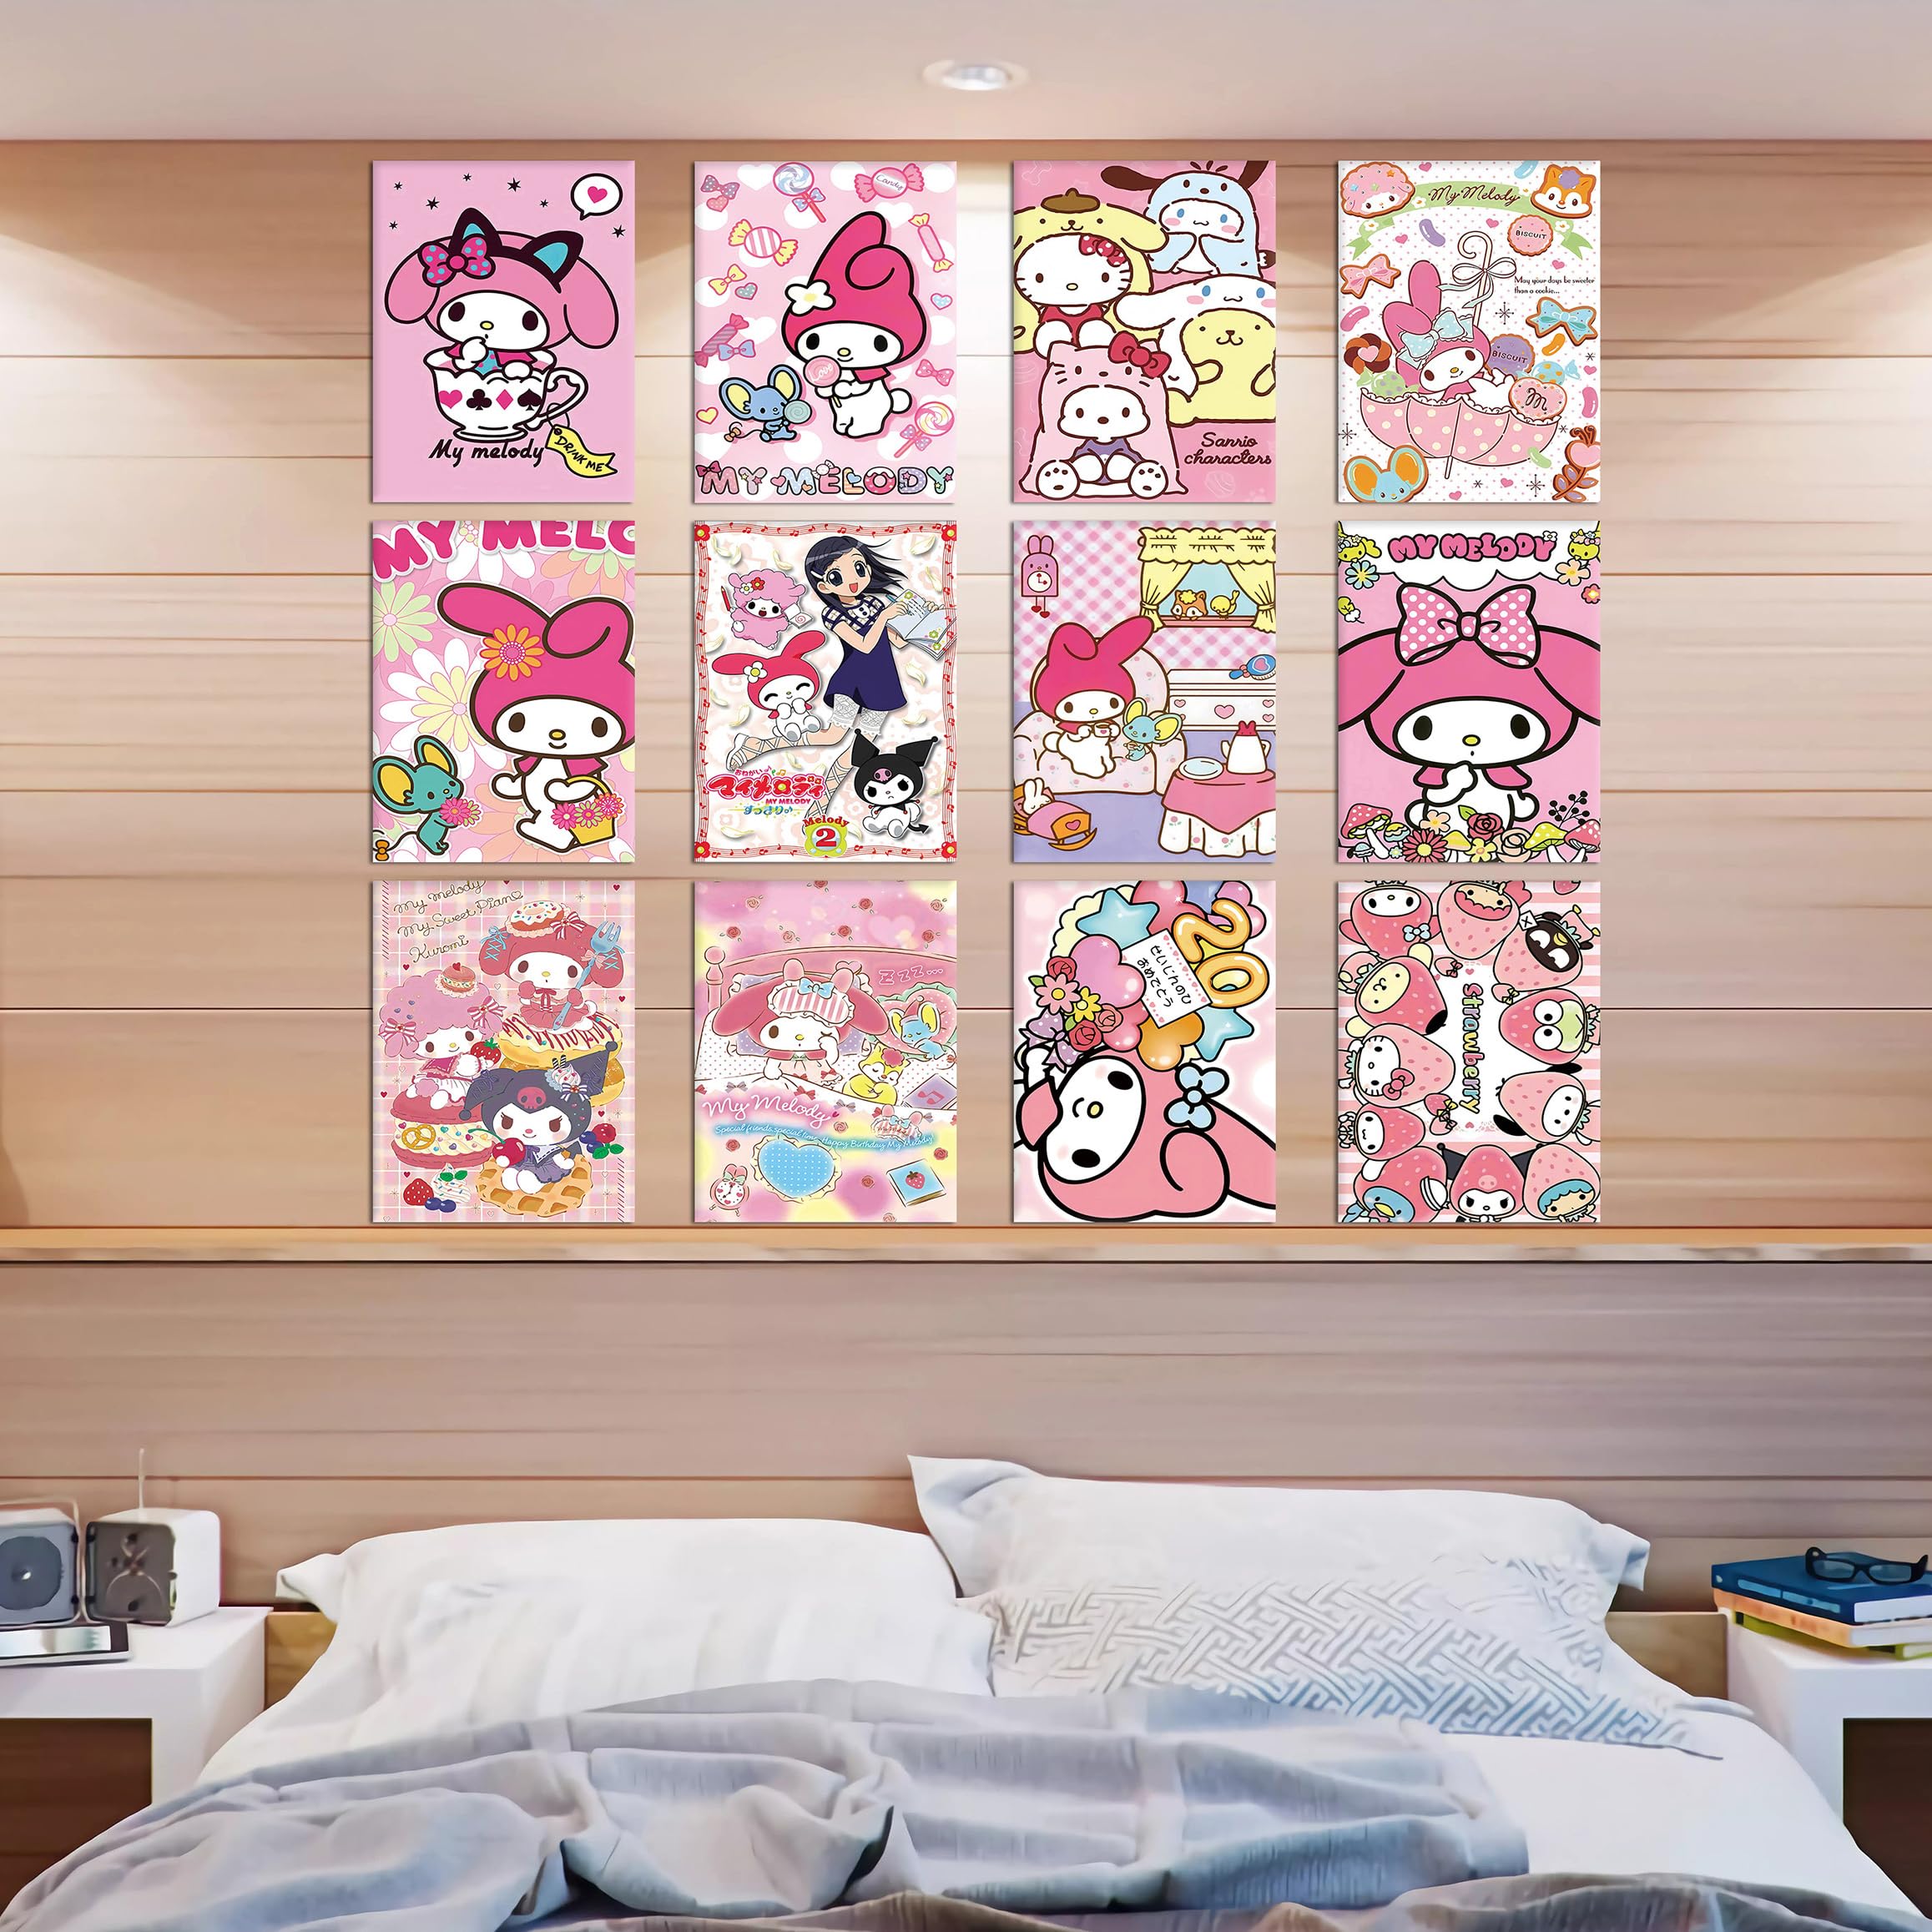 FUPO Goddess Kawaii Anime Poster Decorative Painting Canvas Wall Art Living  Room Posters Bedroom Painting 12x18inch(30x45cm) : Amazon.ca: Home